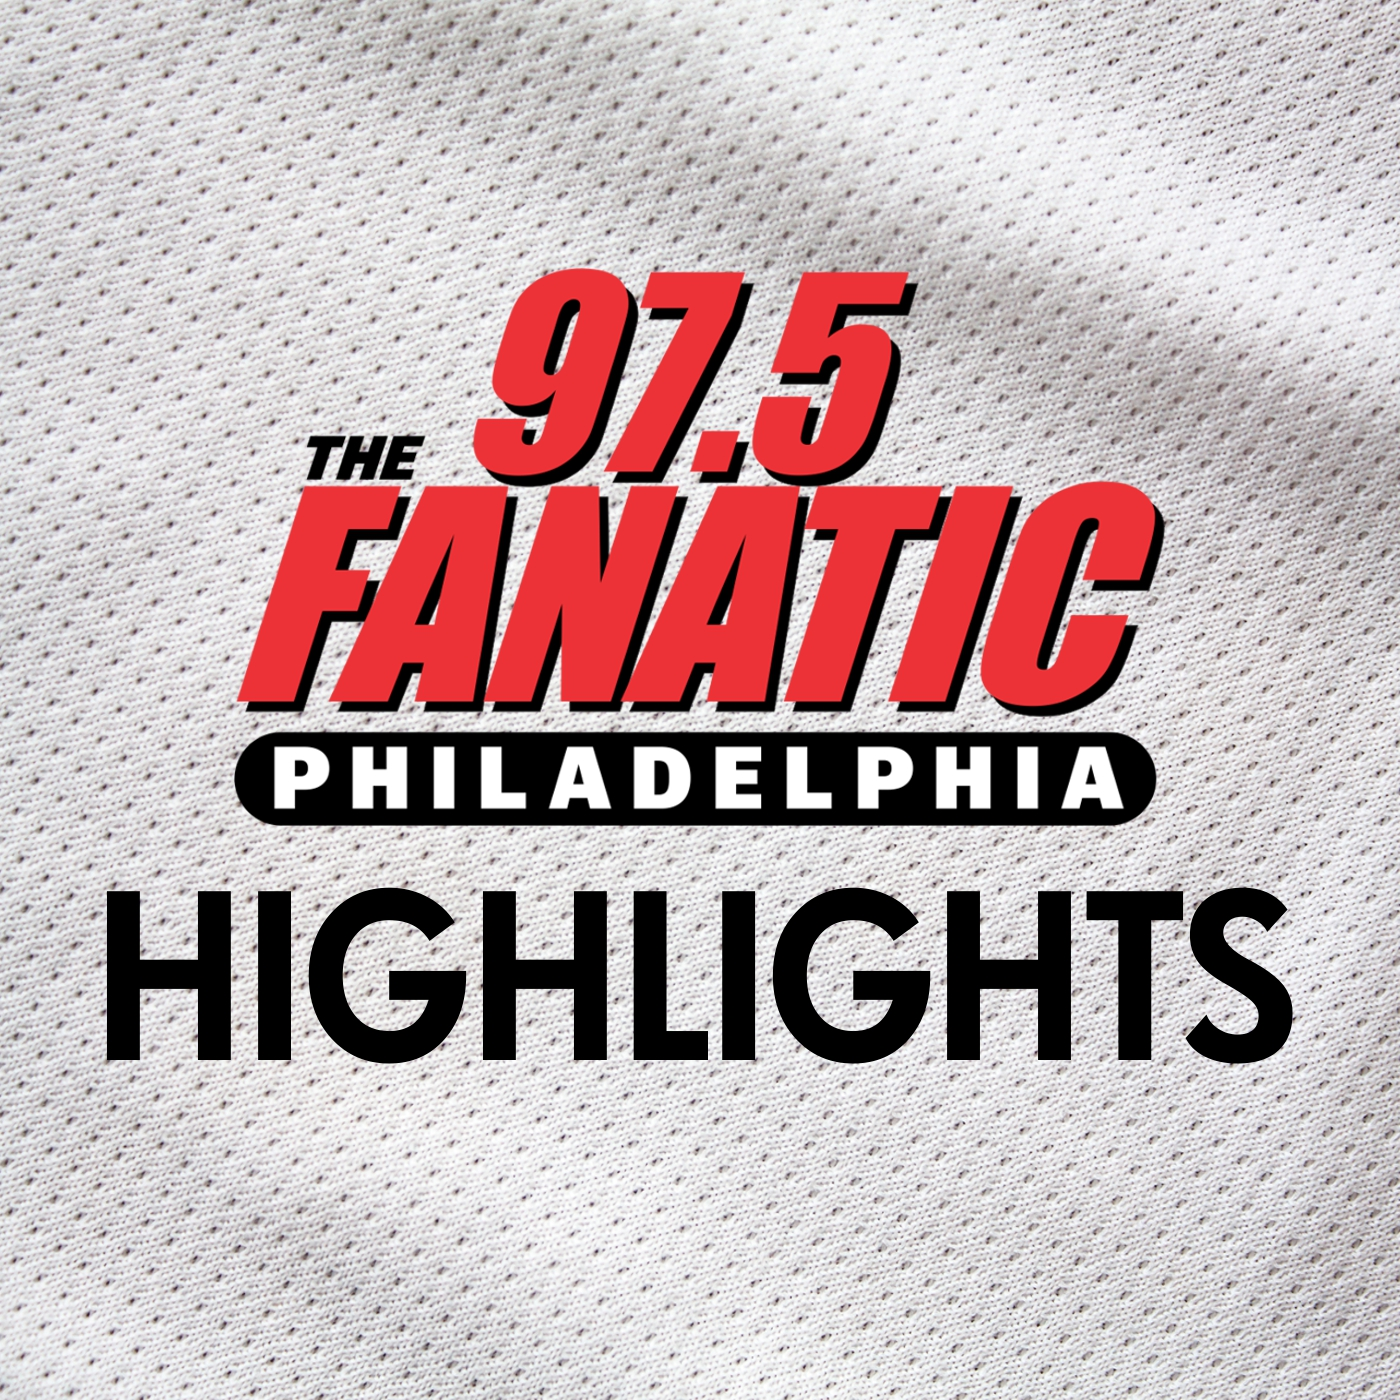 Fanatic Weekend | Bill Colarulo | Sirianni's Role in the Offense